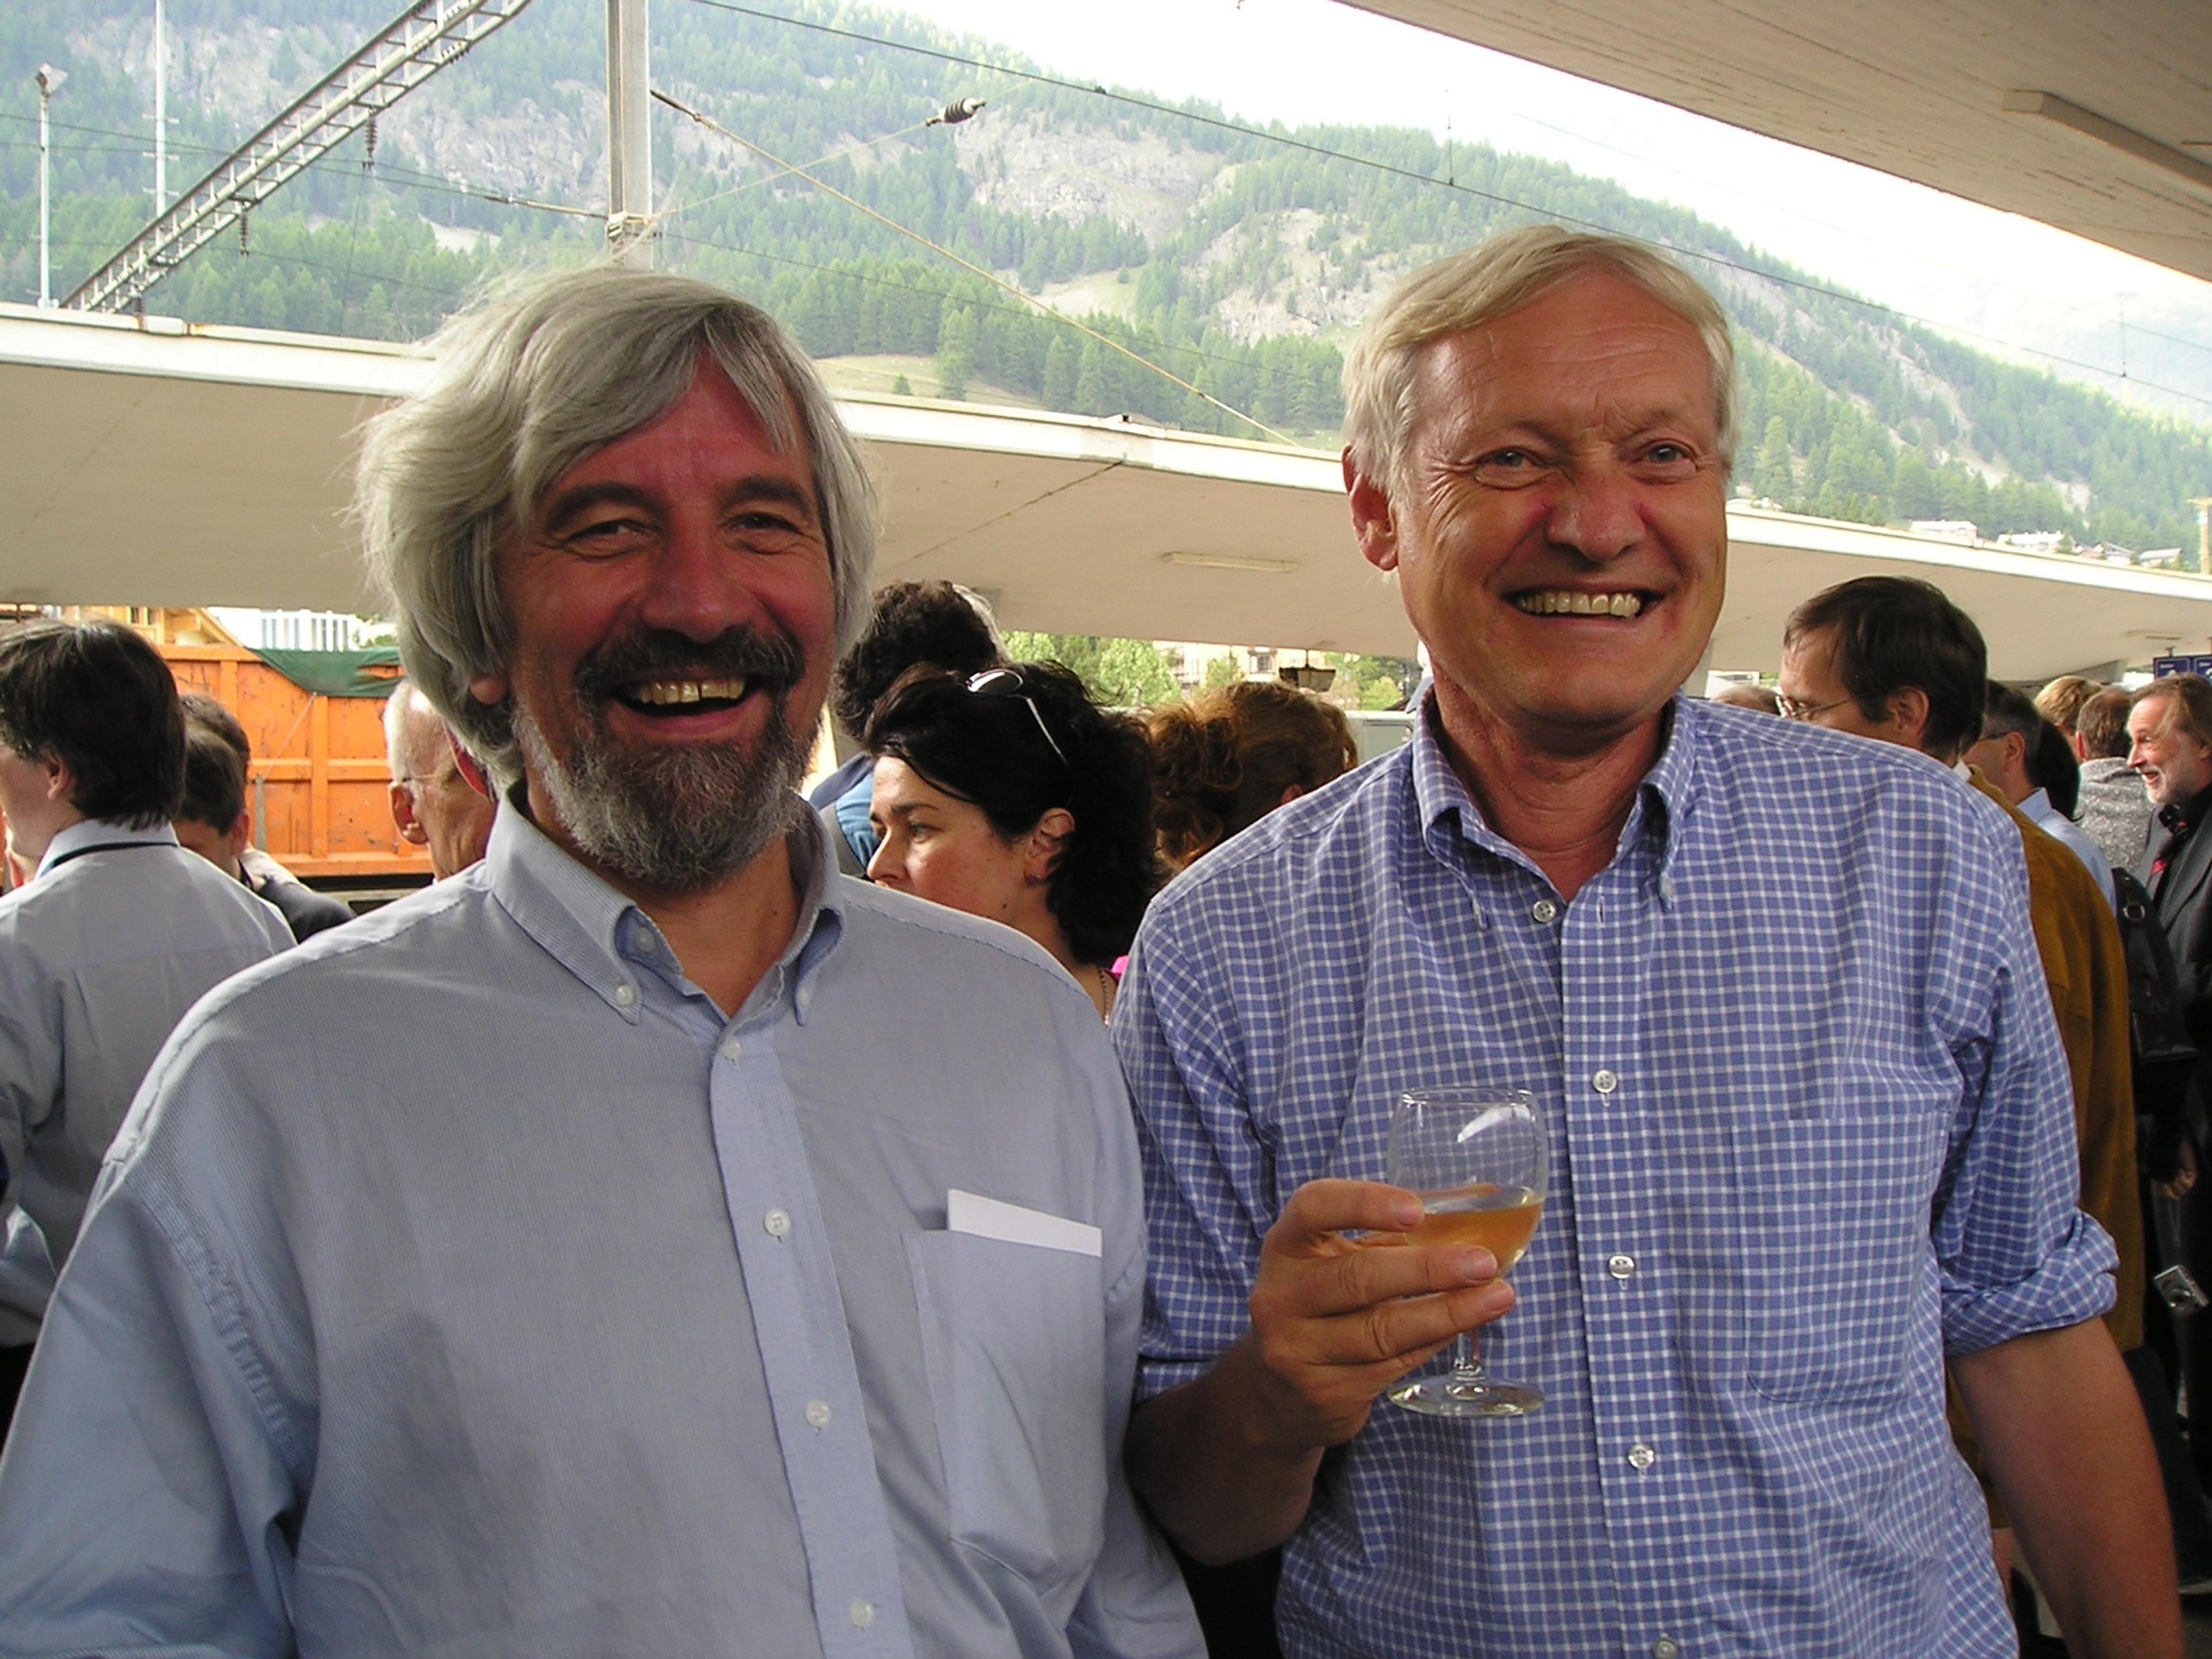 Maximilian Haider with Joachim Frank at an EM-Conference in Davos/Switzerland in 2005